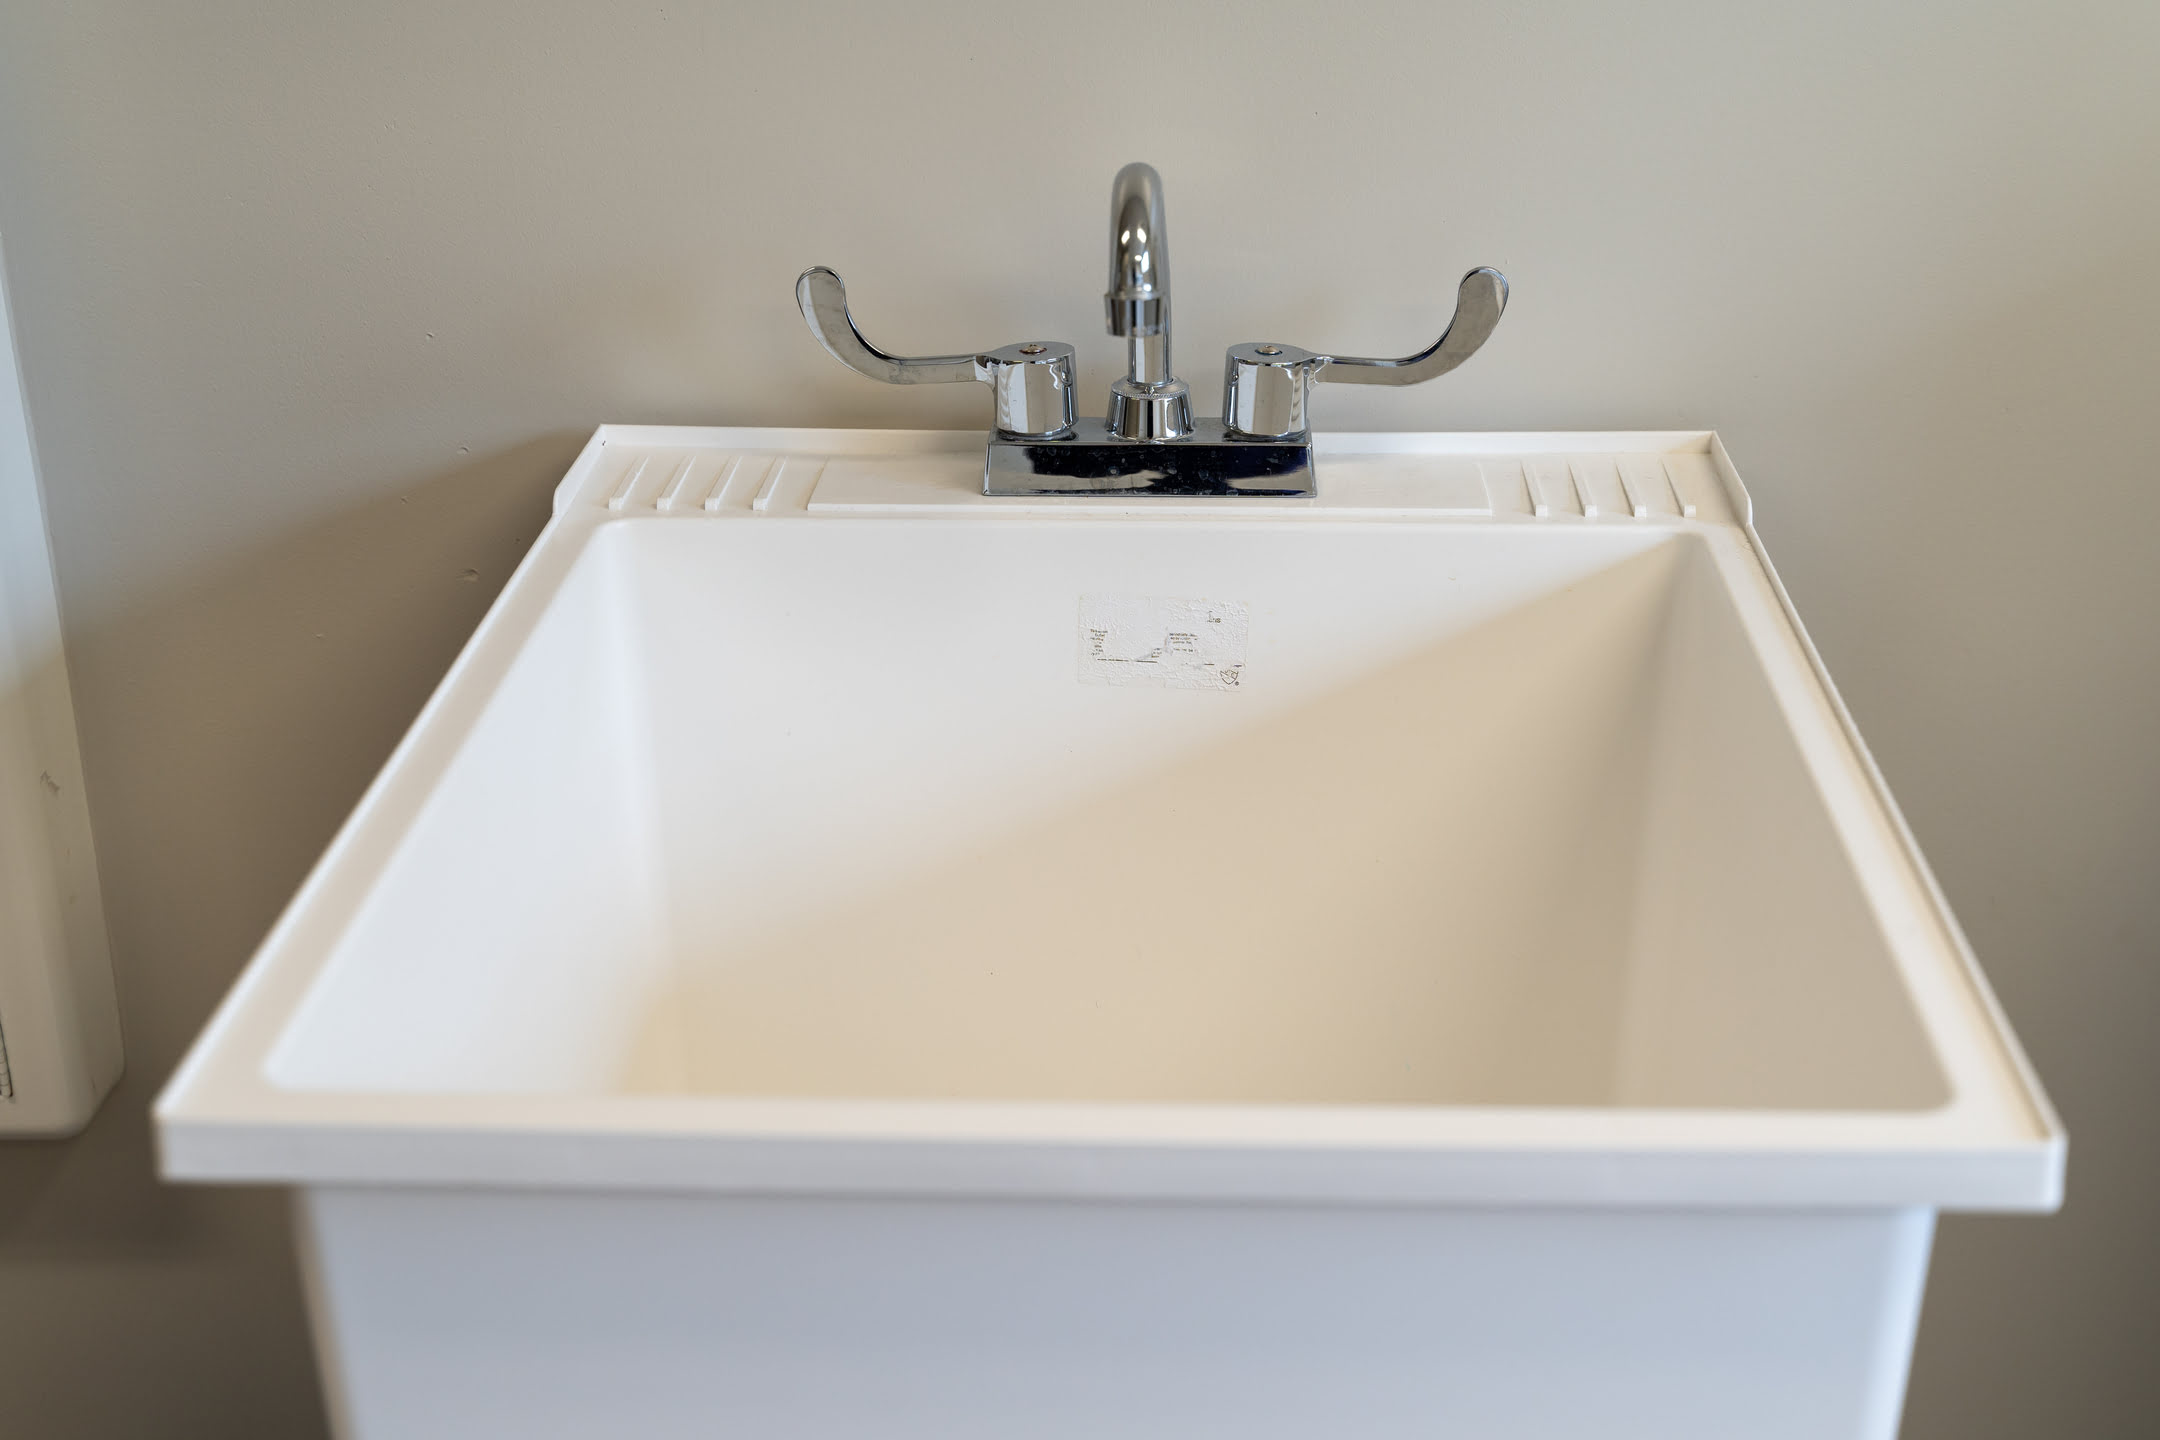 How To Clean Utility Sink